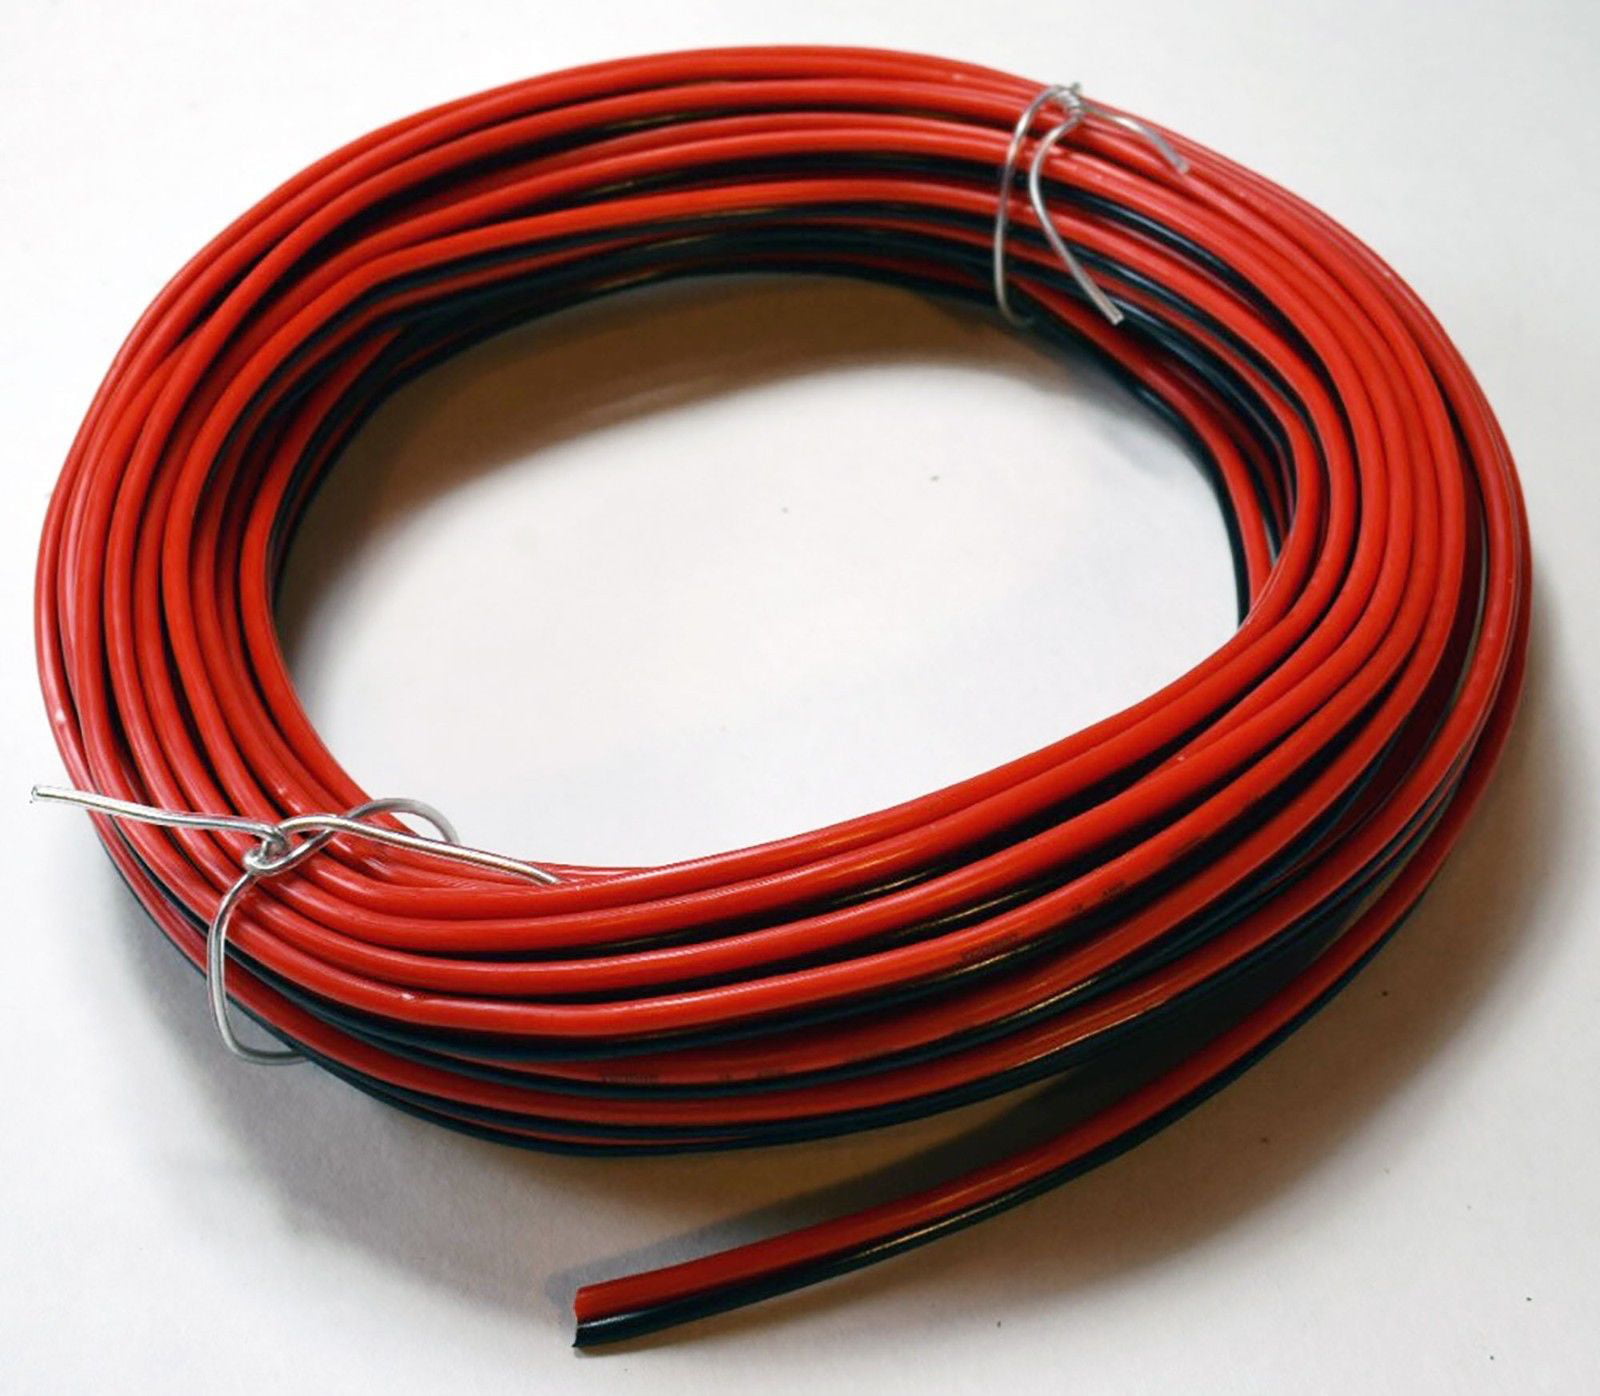 14 GAUGE RED BLACK SPEAKER WIRE 50 FT AWG CABLE POWER GROUND STRANDED COPPER 